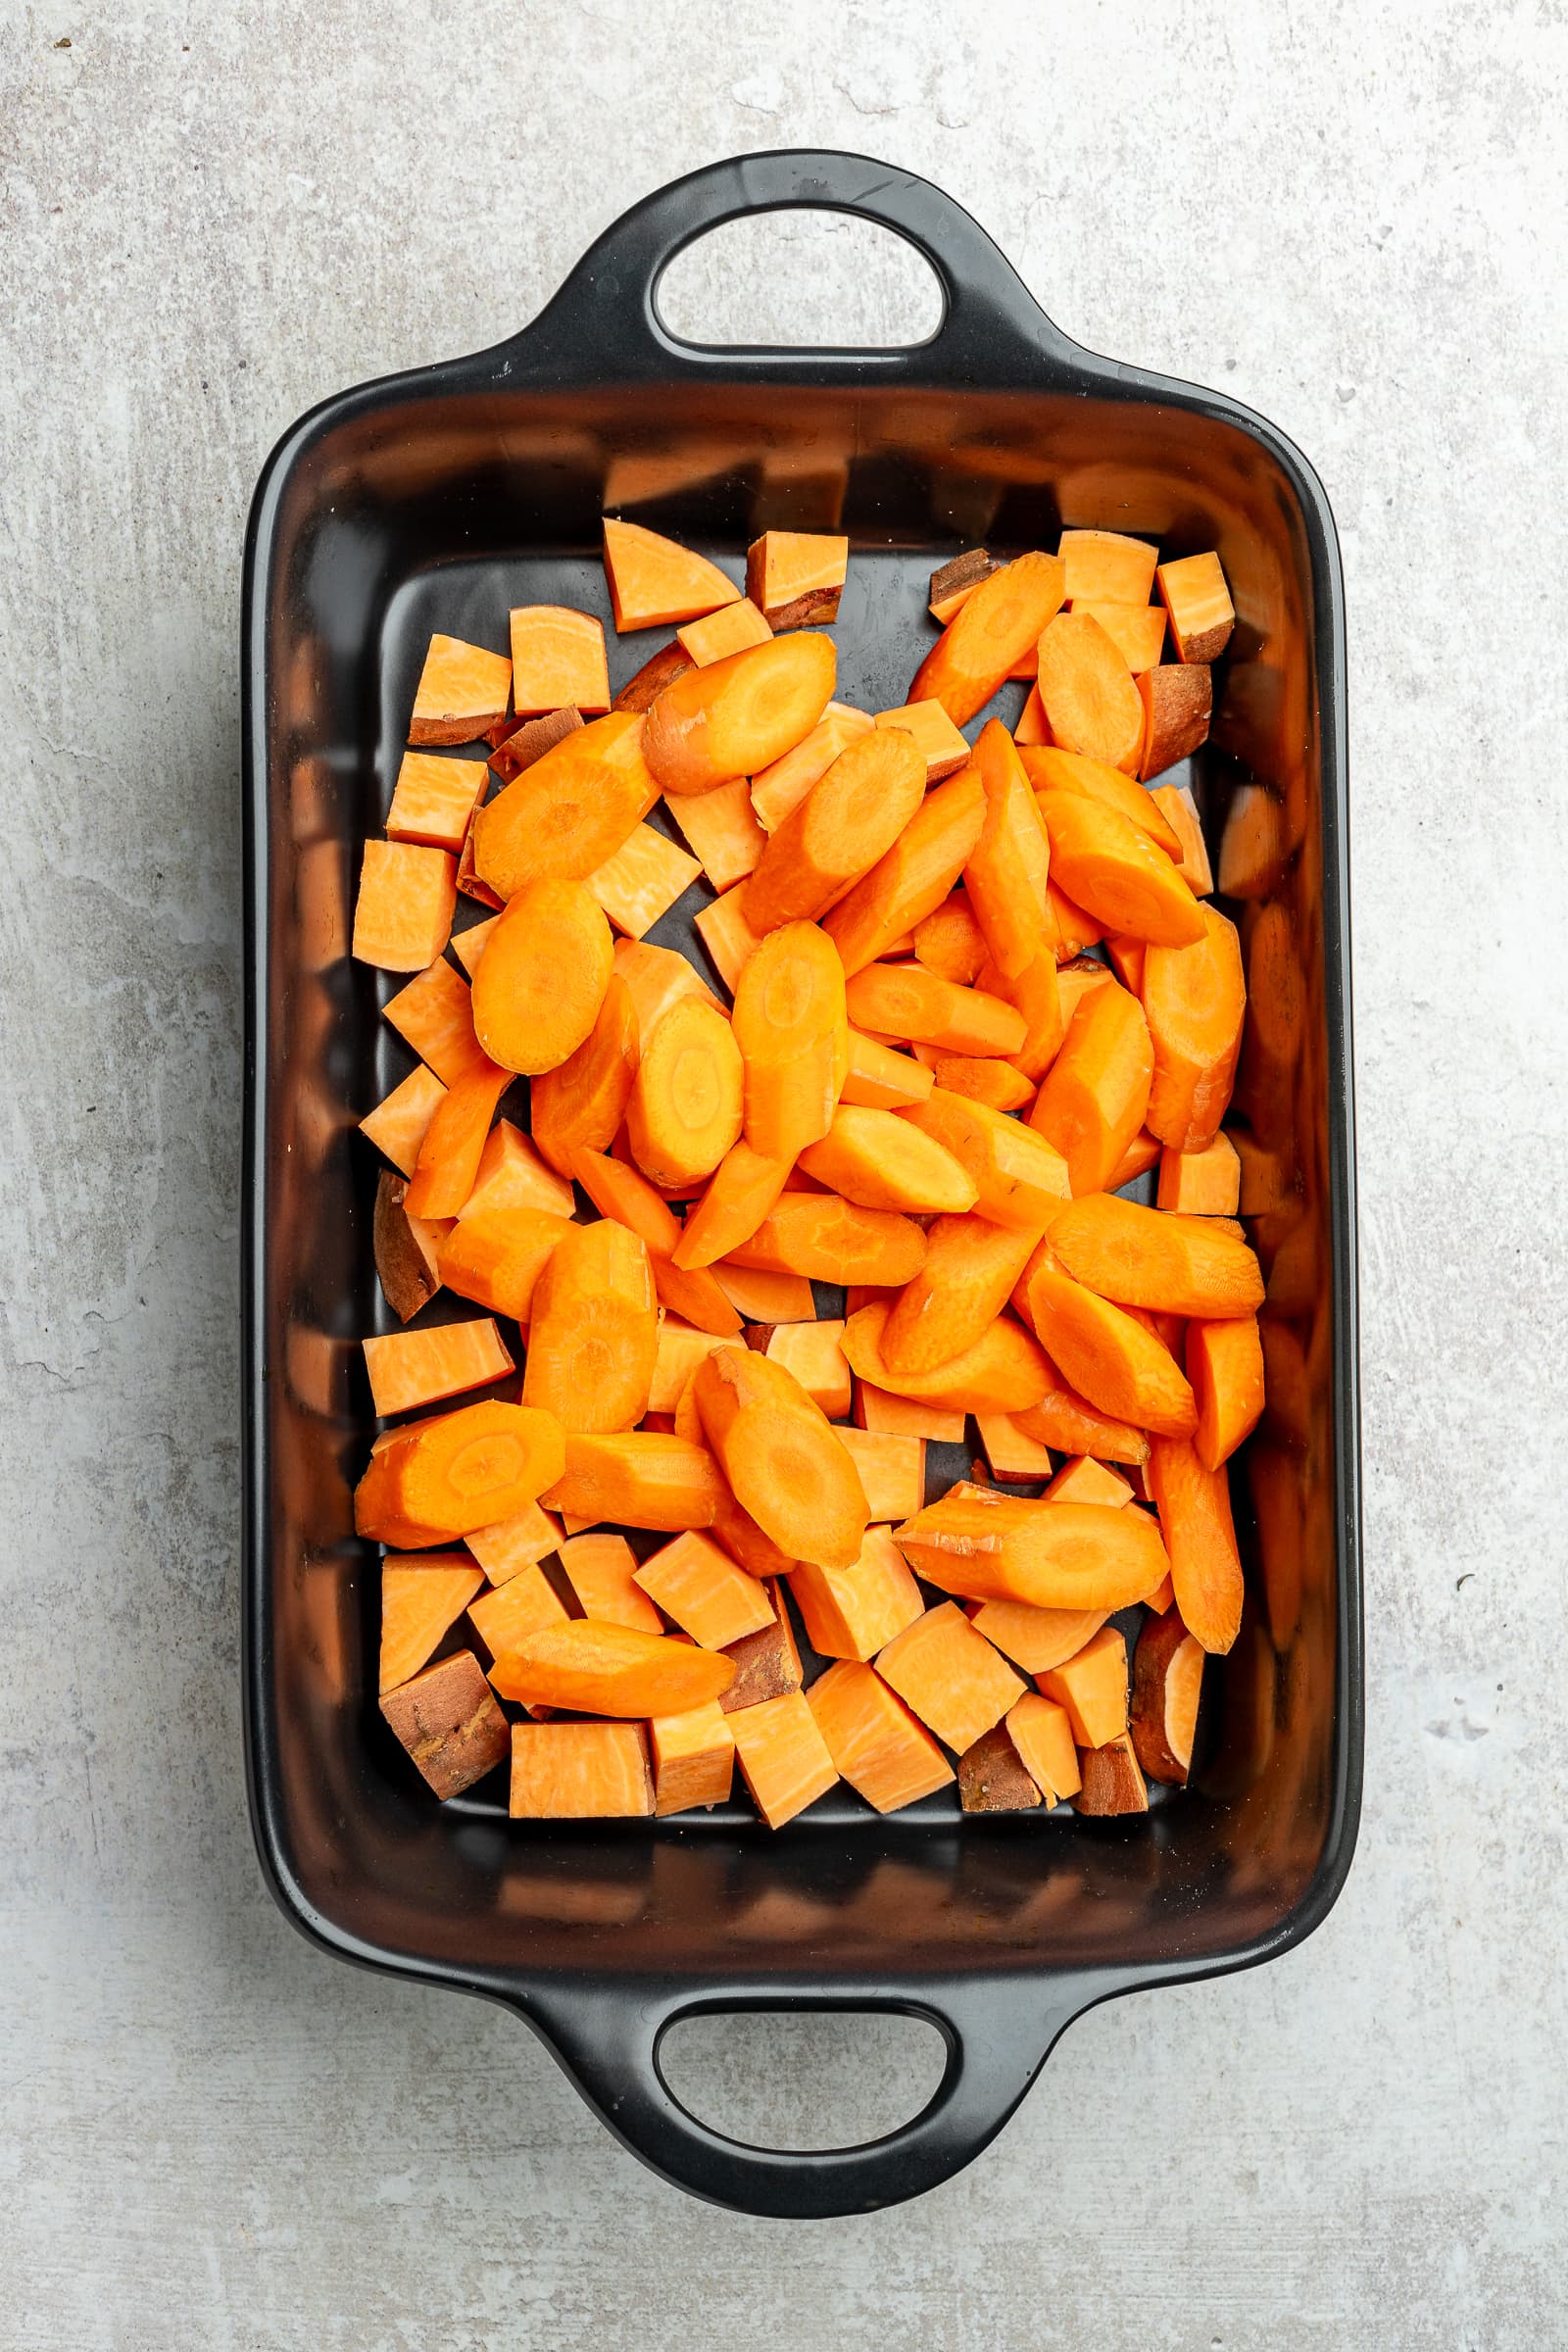 Chopped sweet potatoes and carrots in a large baking dish.